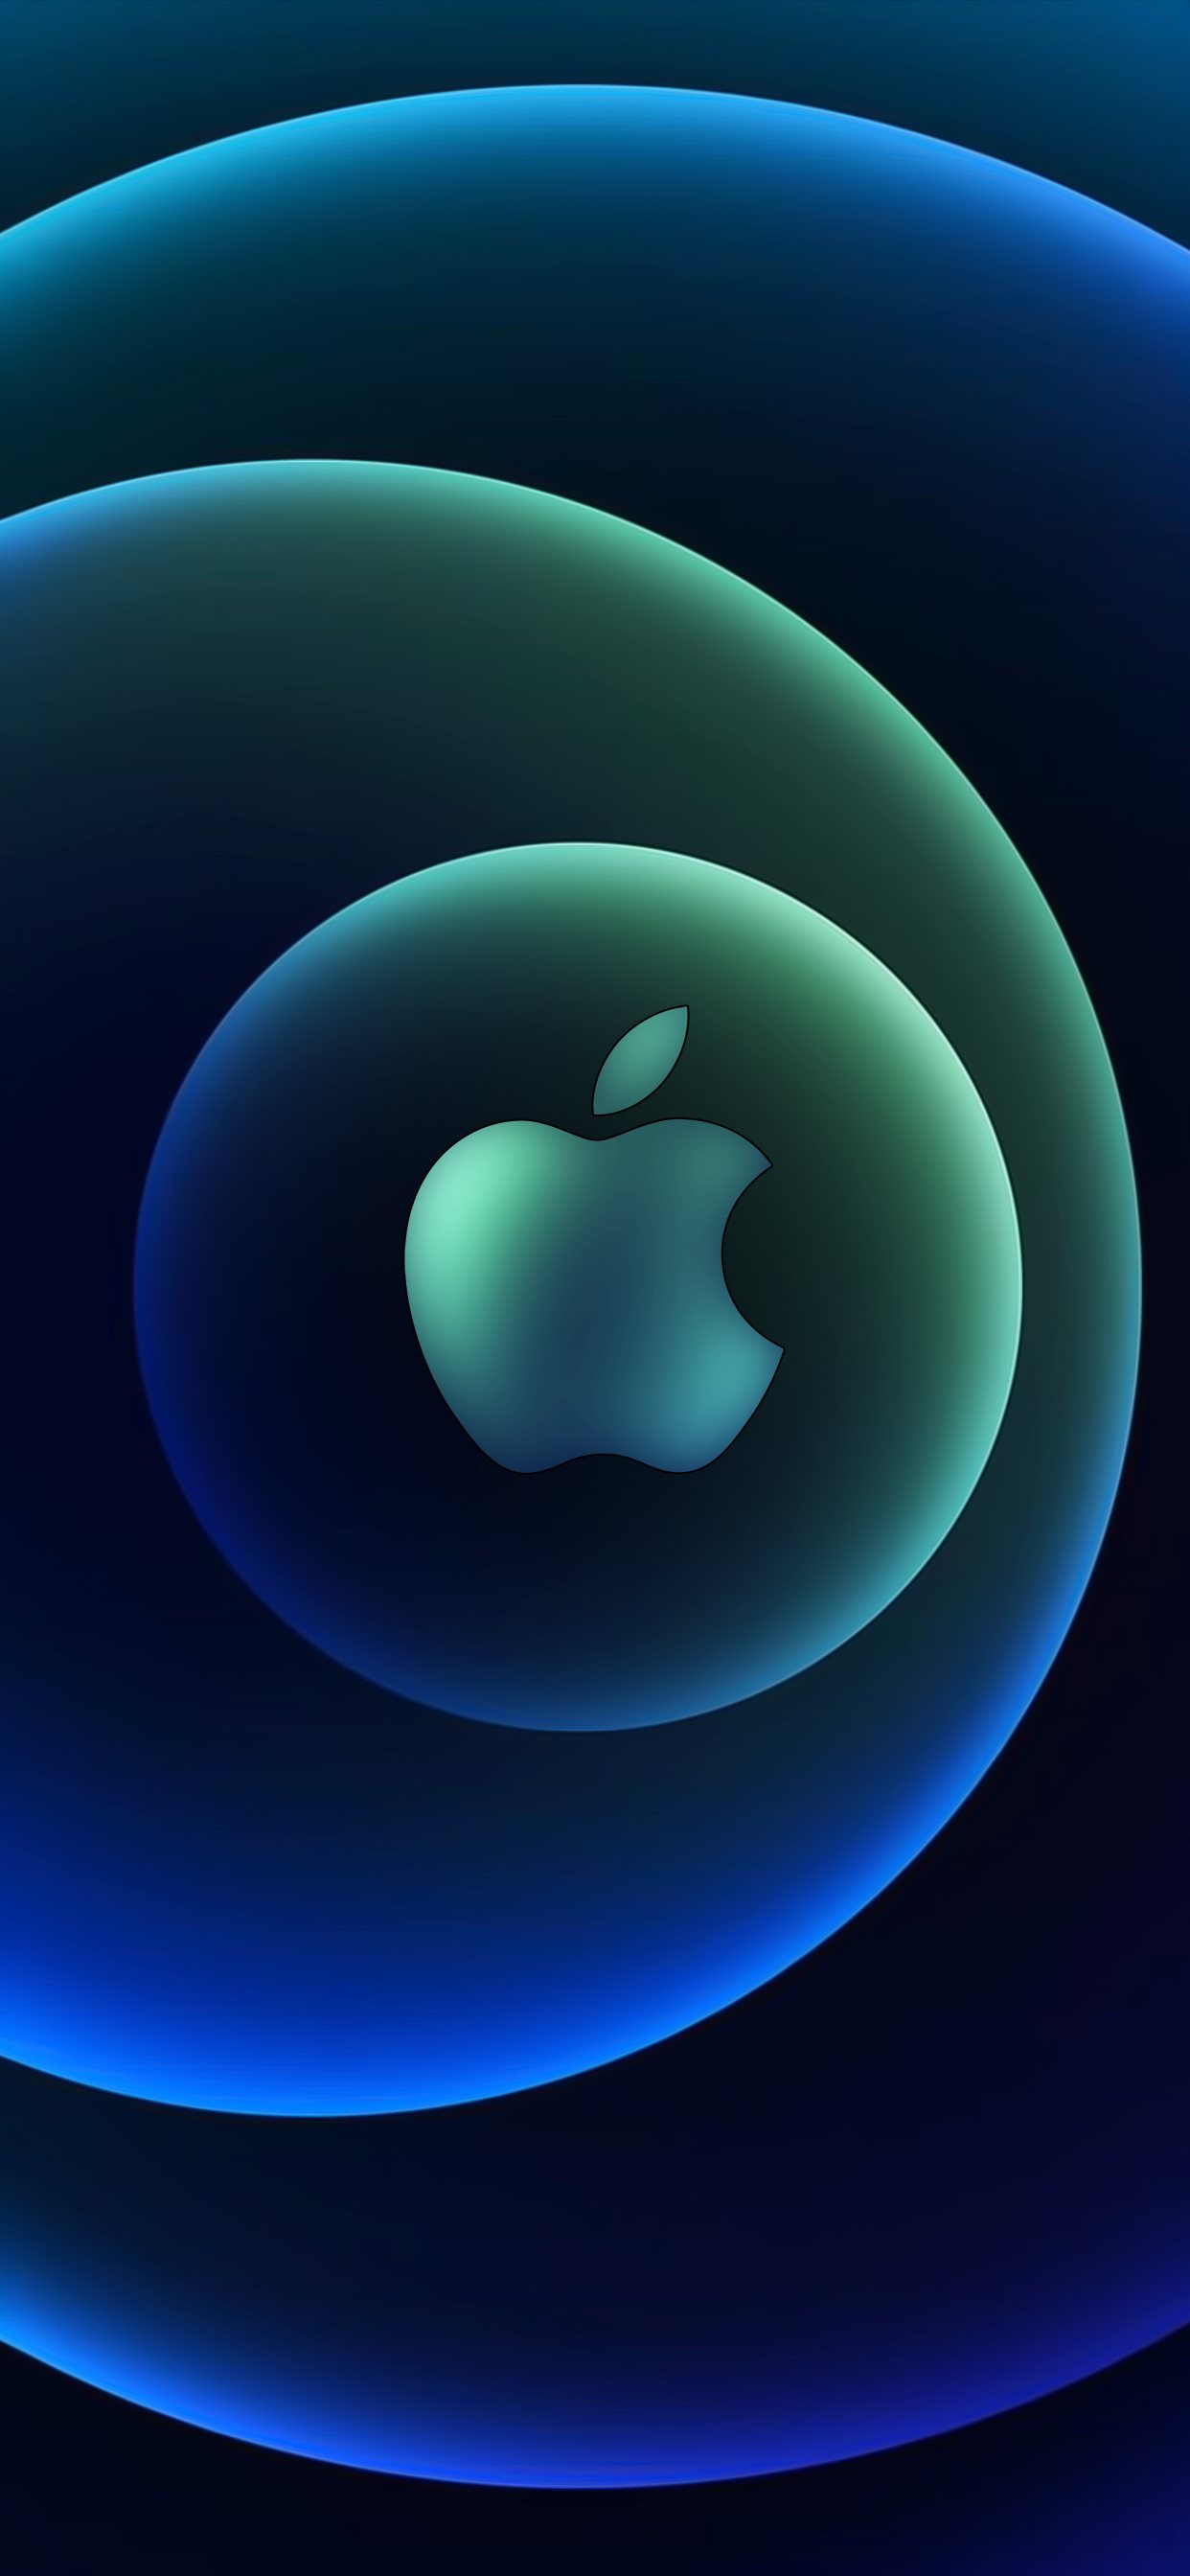 Apple Iphone 13 Pro Max Wallpaper - Midnight Green Wallpapers : Iphone